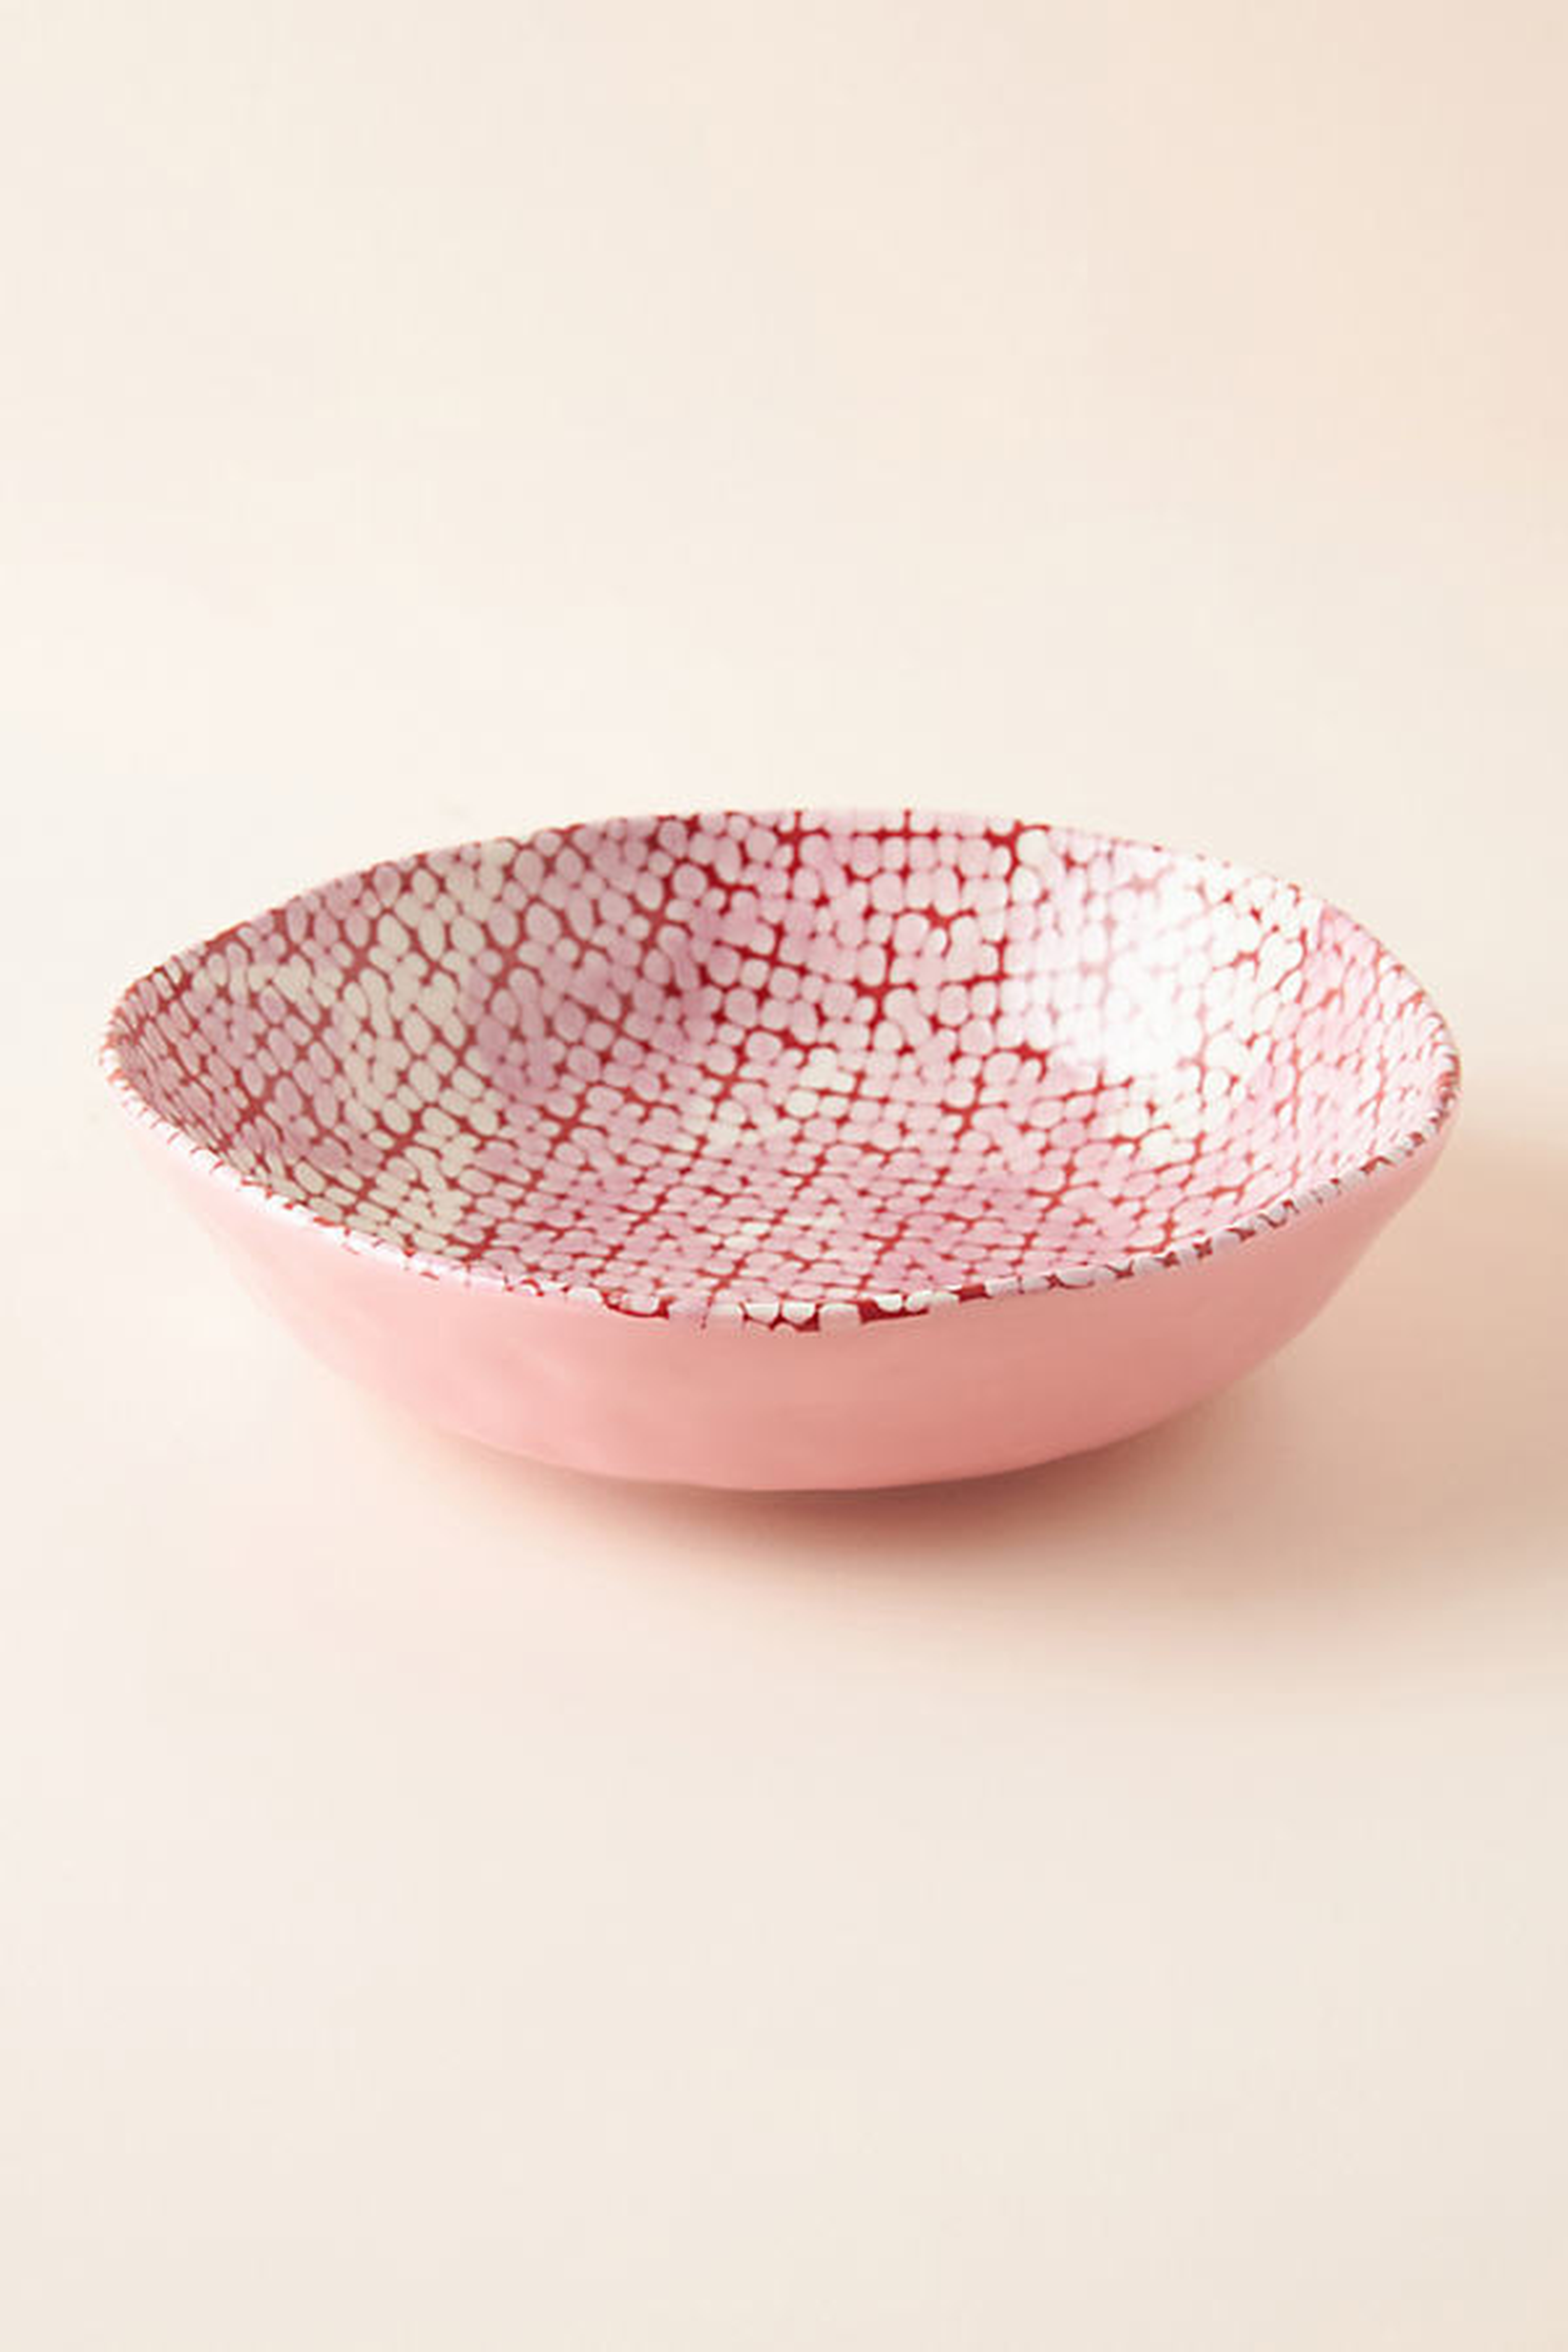 Cora Grain Bowl By Anthropologie in Pink Size BOWL - Anthropologie